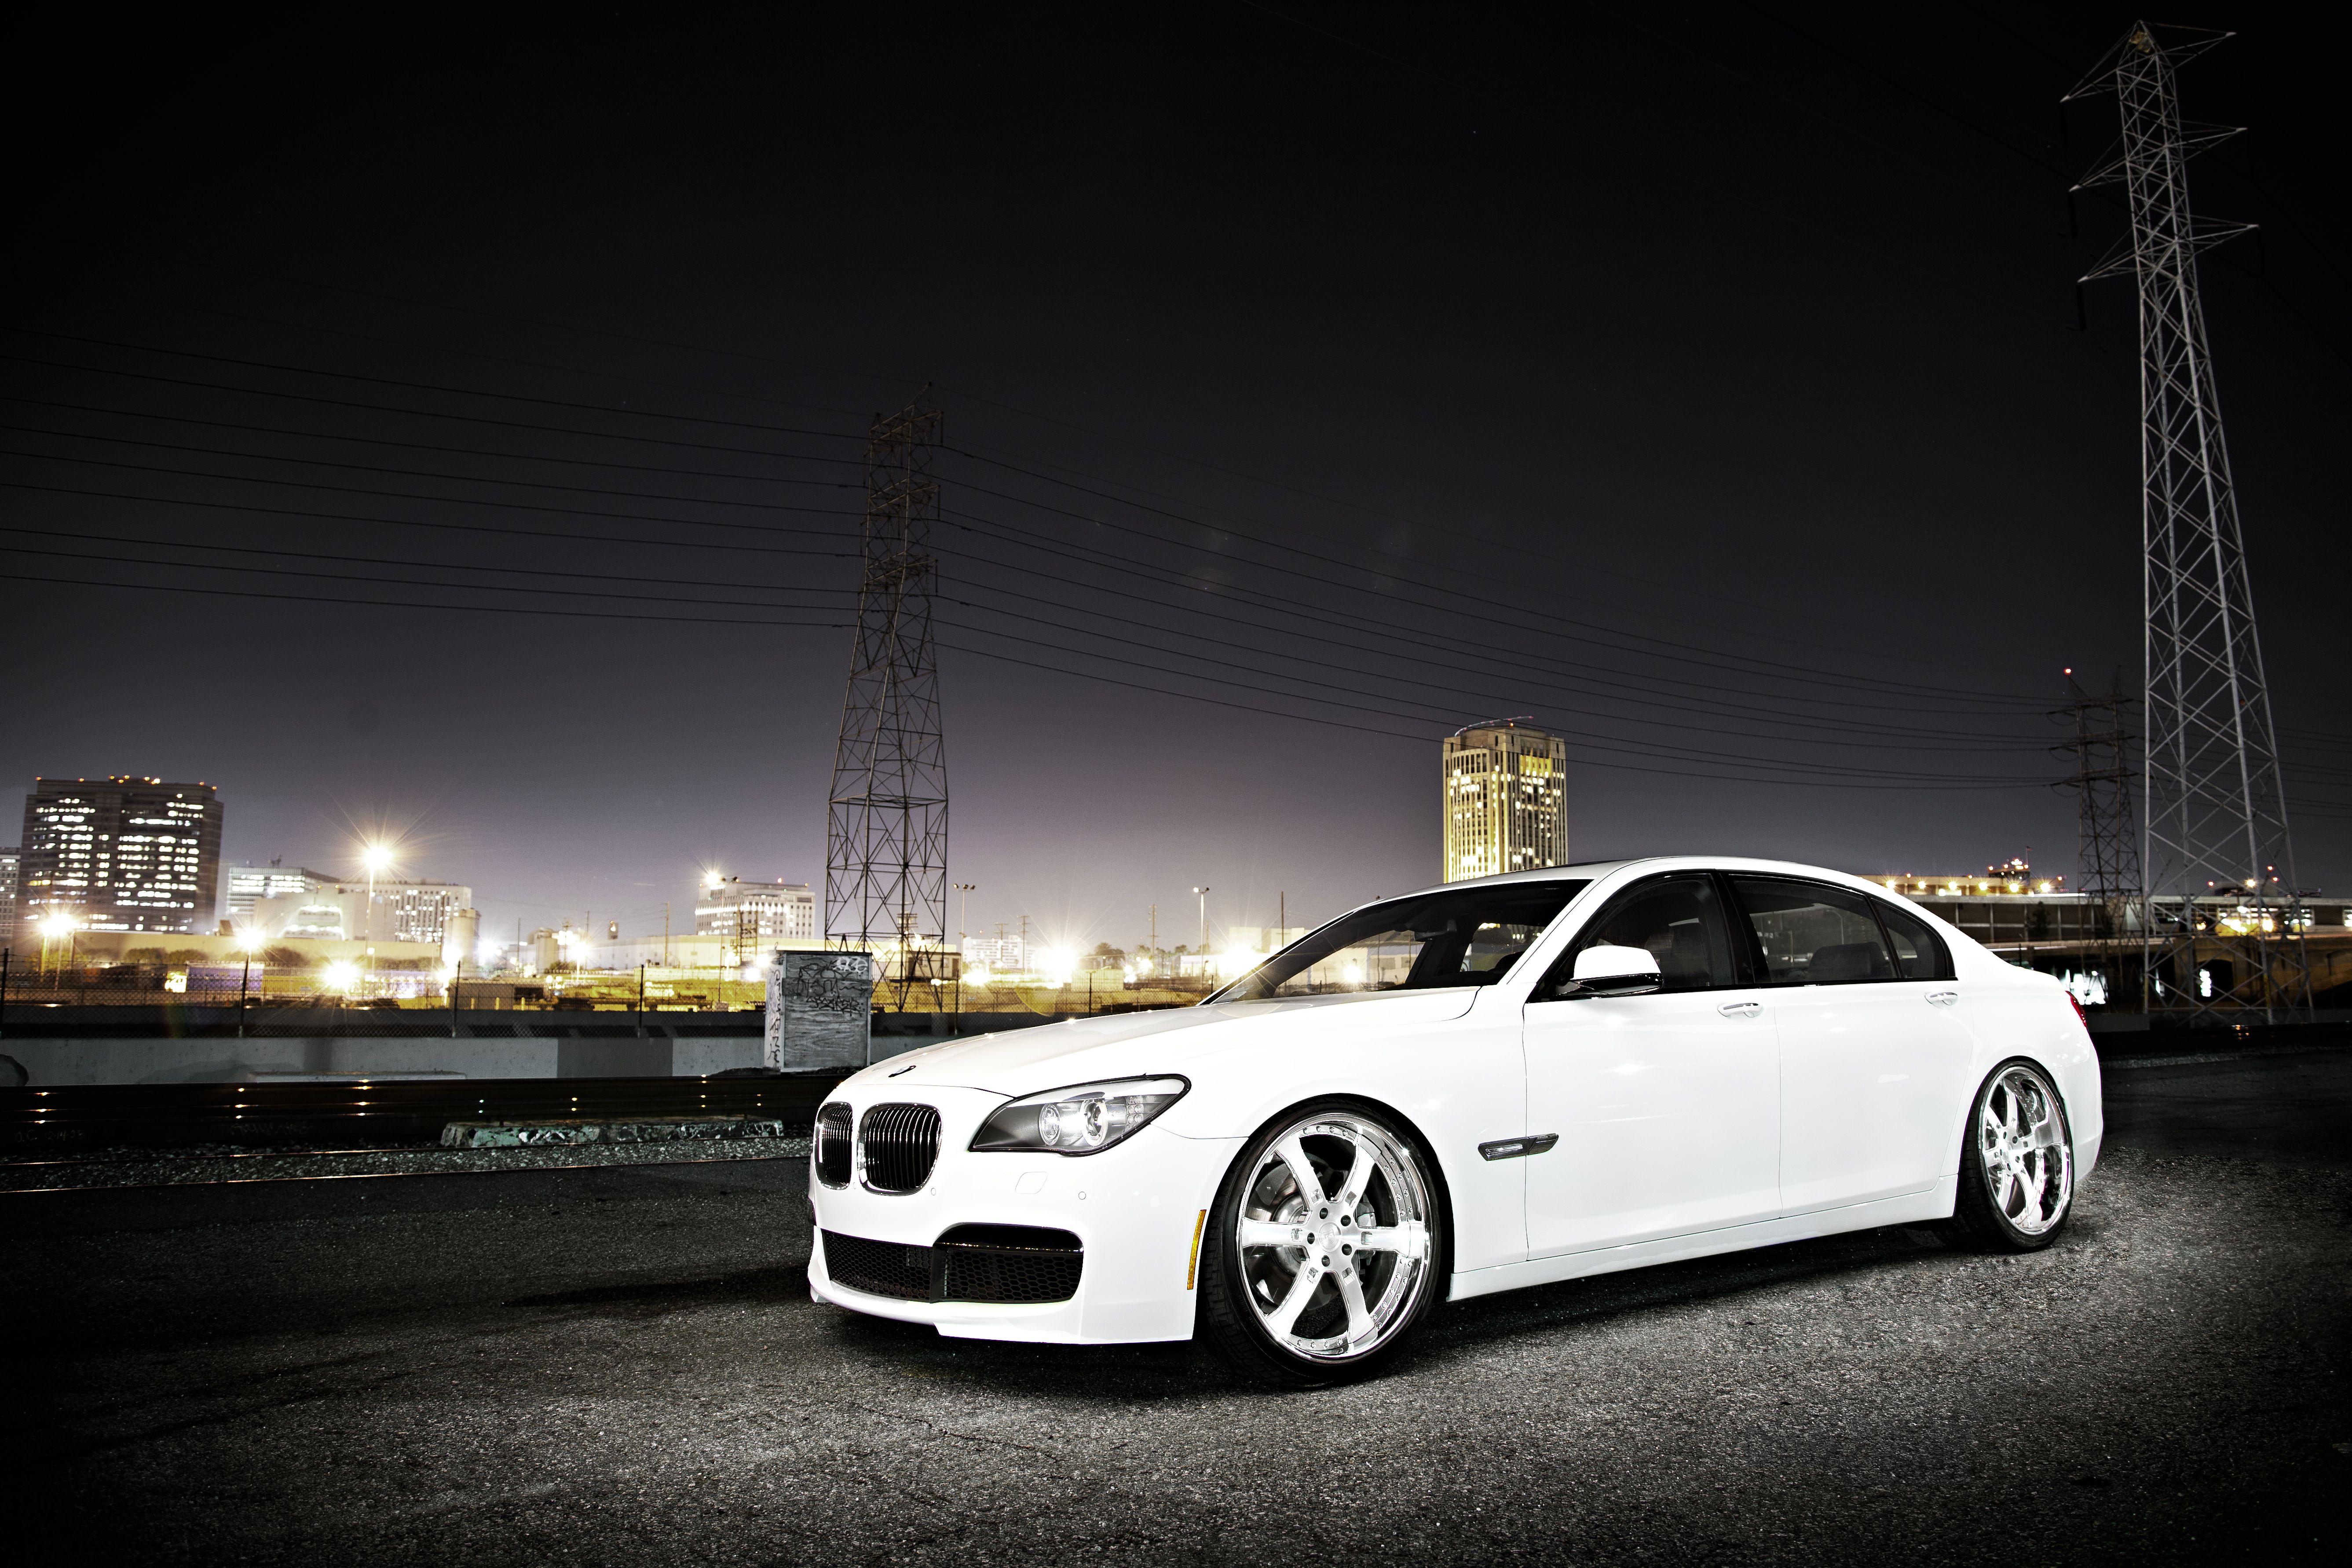 White BMW 7 series wallpaper and image, picture, photo